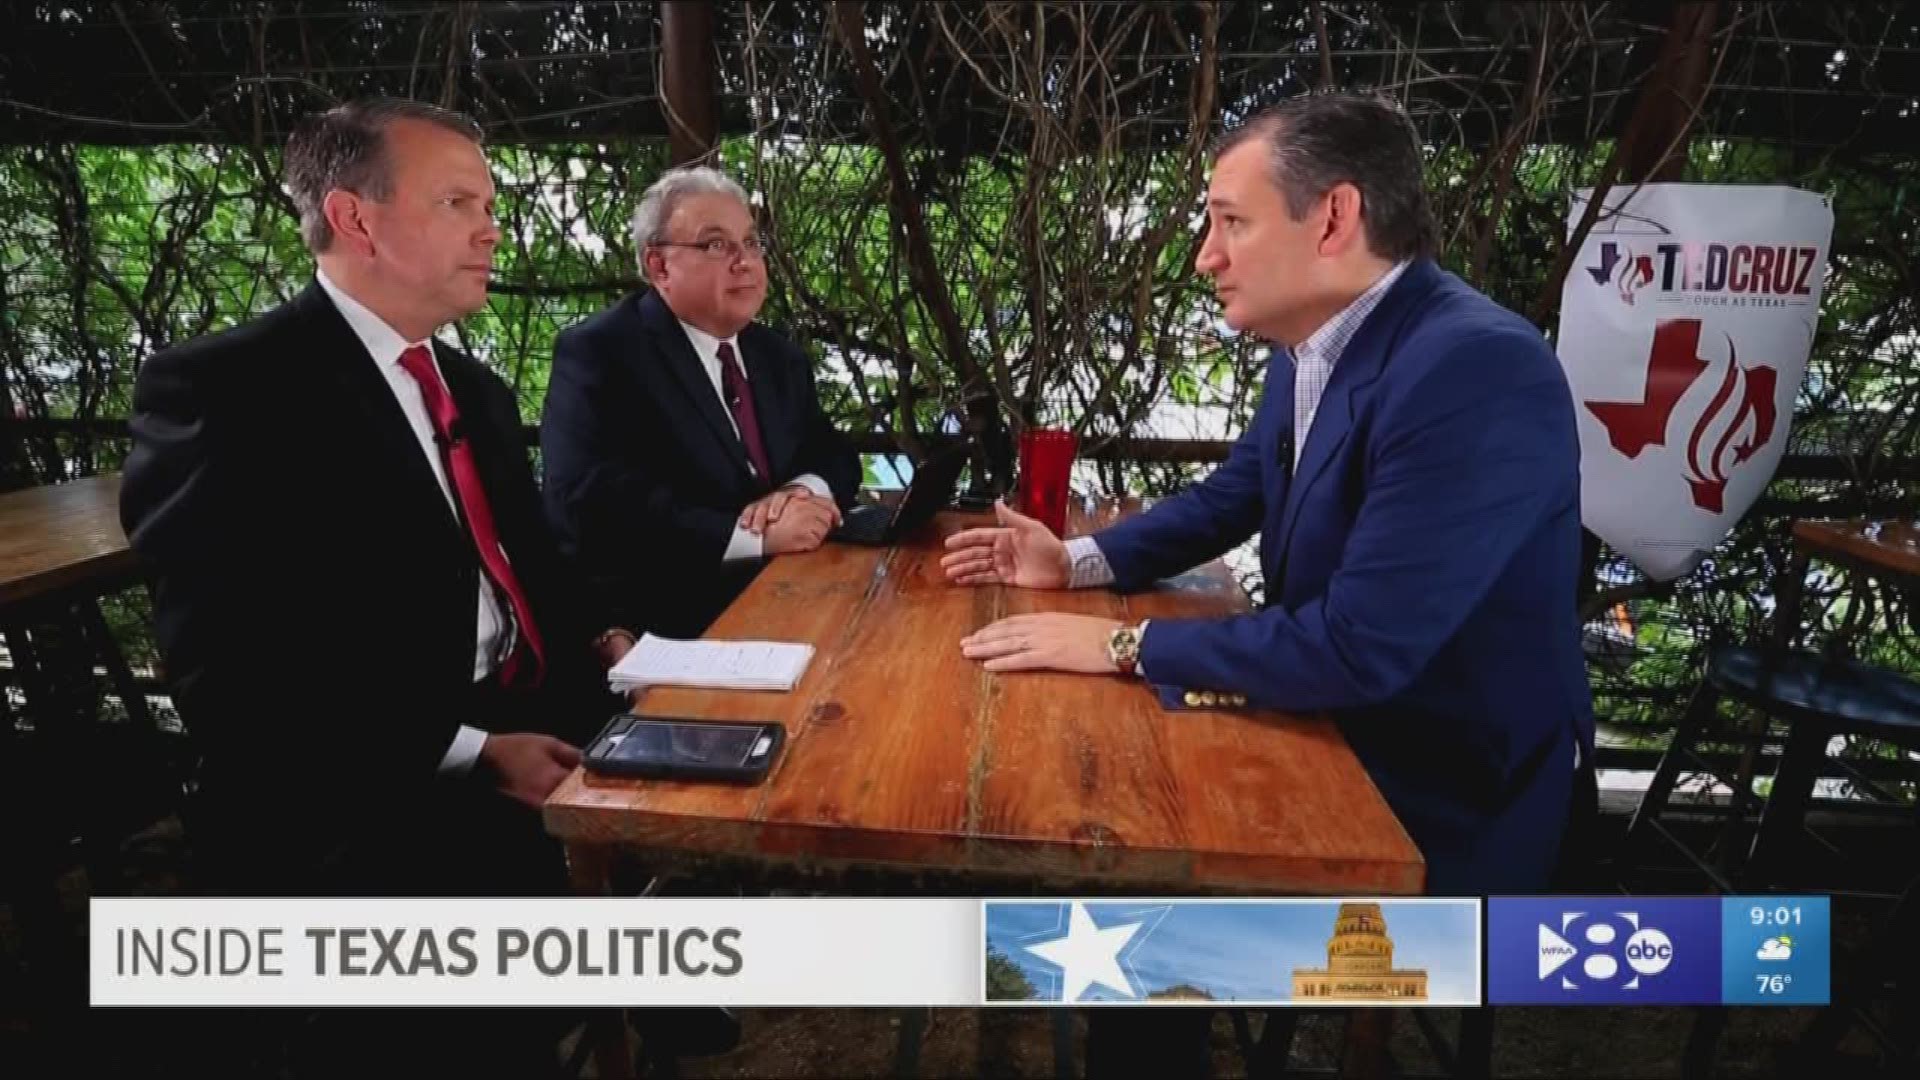 The Senator sat down with WFAA's Jason Whitely and Bud Kennedy of the Fort Worth Star Telegram to discuss the final push in the senate race against Beto O'Rourke.